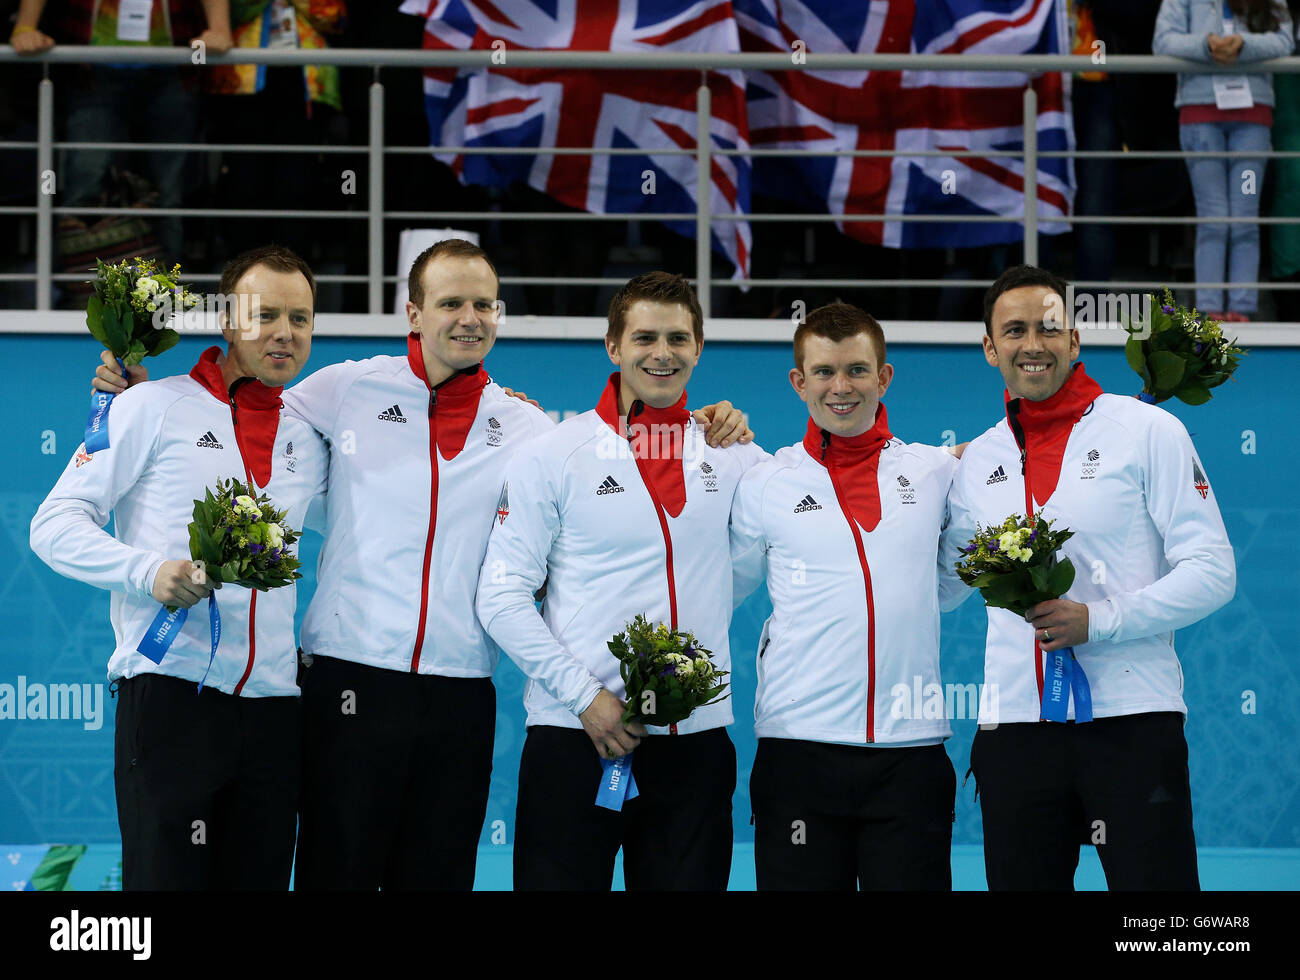 Great Britain's (left to right) Tom Brewster, Michael Goodfellow, Scott Andrews, Greg Drummond and David Murdoch during the flower ceremony after taking Silver in the Men's Gold medal match at the Ice Cube Curling Centre during the 2014 Sochi Olympic Games in Sochi, Russia. Stock Photo